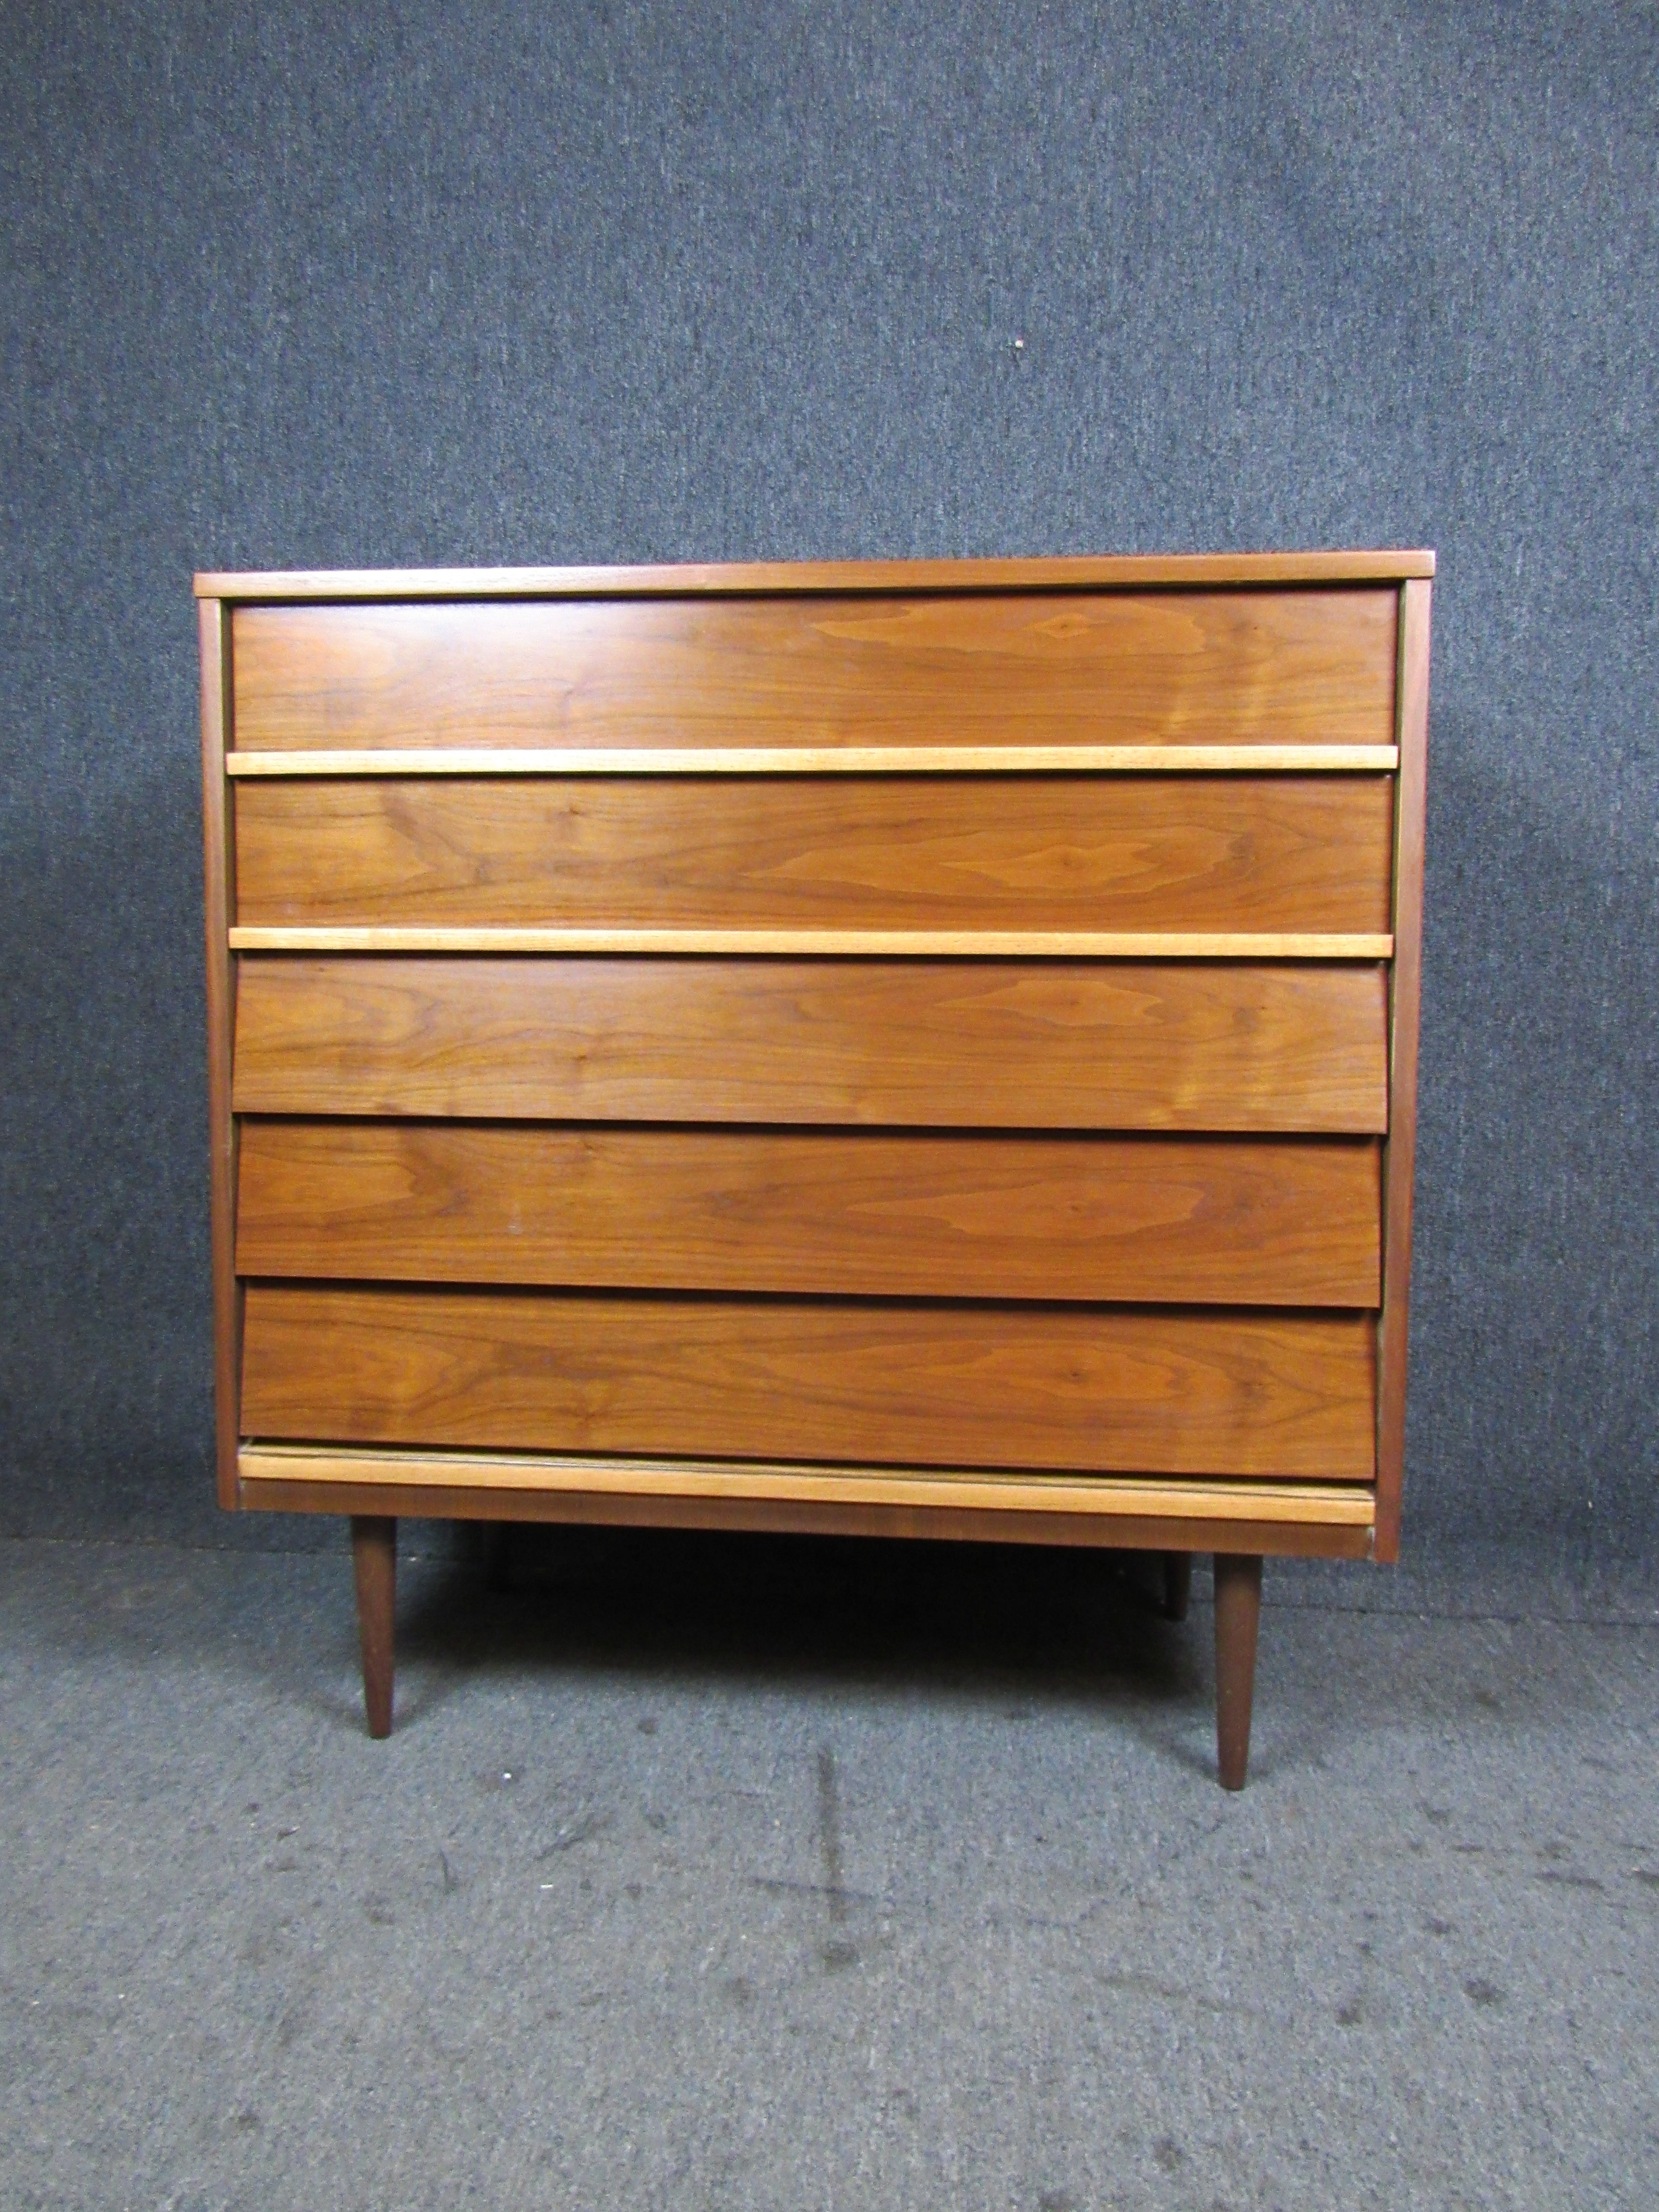 Beautifully refinished midcentury vintage chest of drawers from Lexington, North Carolina's Dixie Furniture Company! With five large, pull-out drawers, this dresser brings together form and function with it's practicality and beautiful appearance.